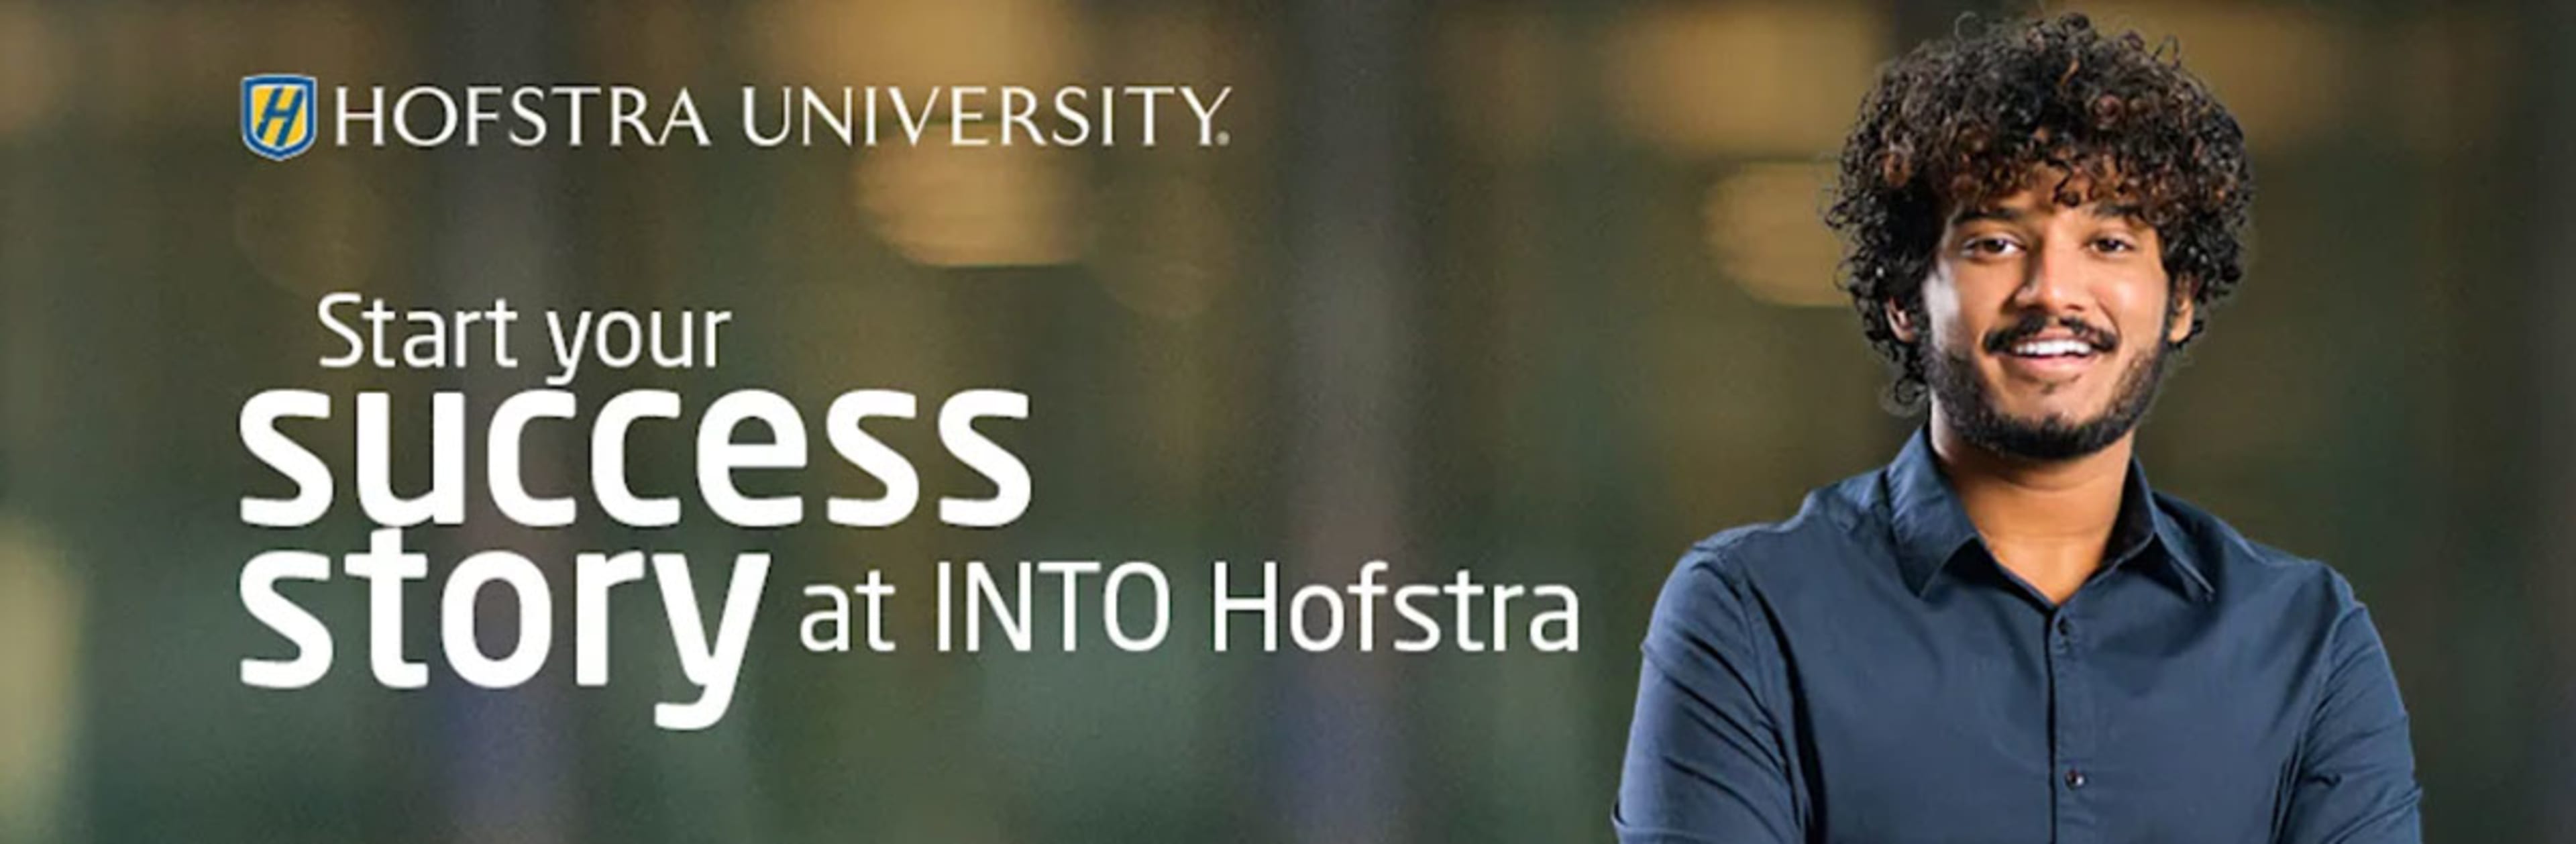 Start your Success story at INTO Hofstra student looking at sign